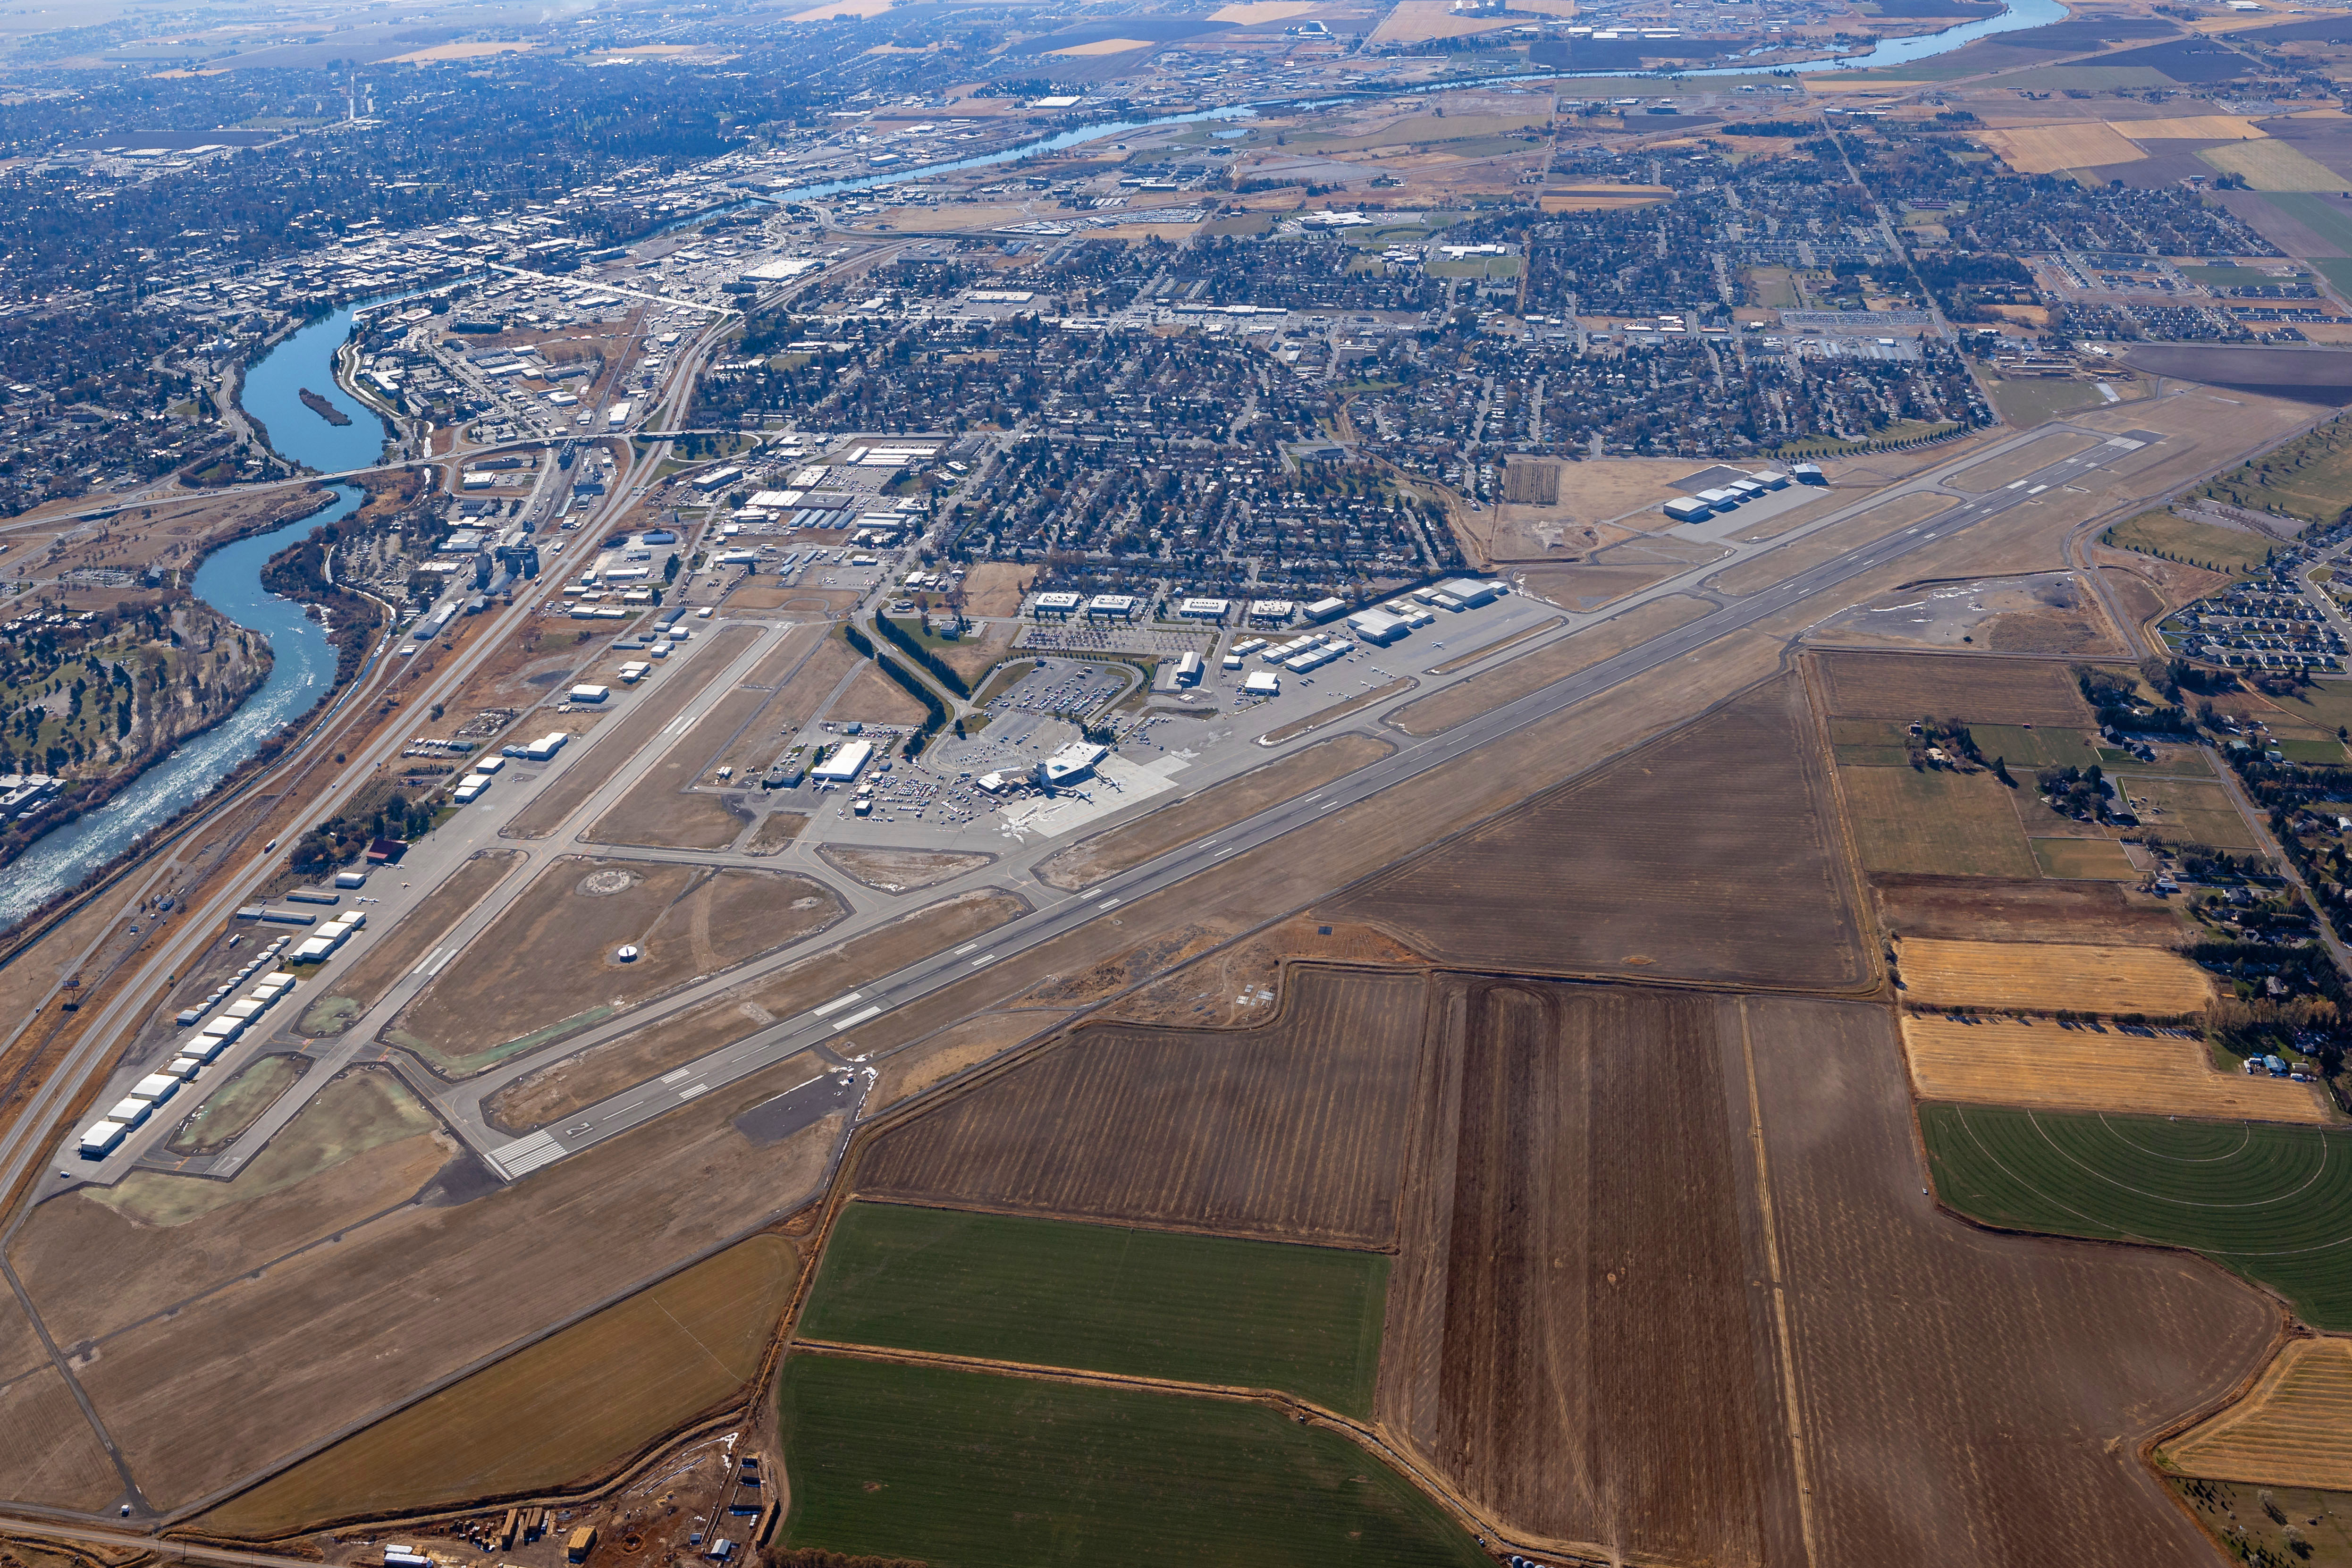 Aerial view of the airport grounds and runways facing south.